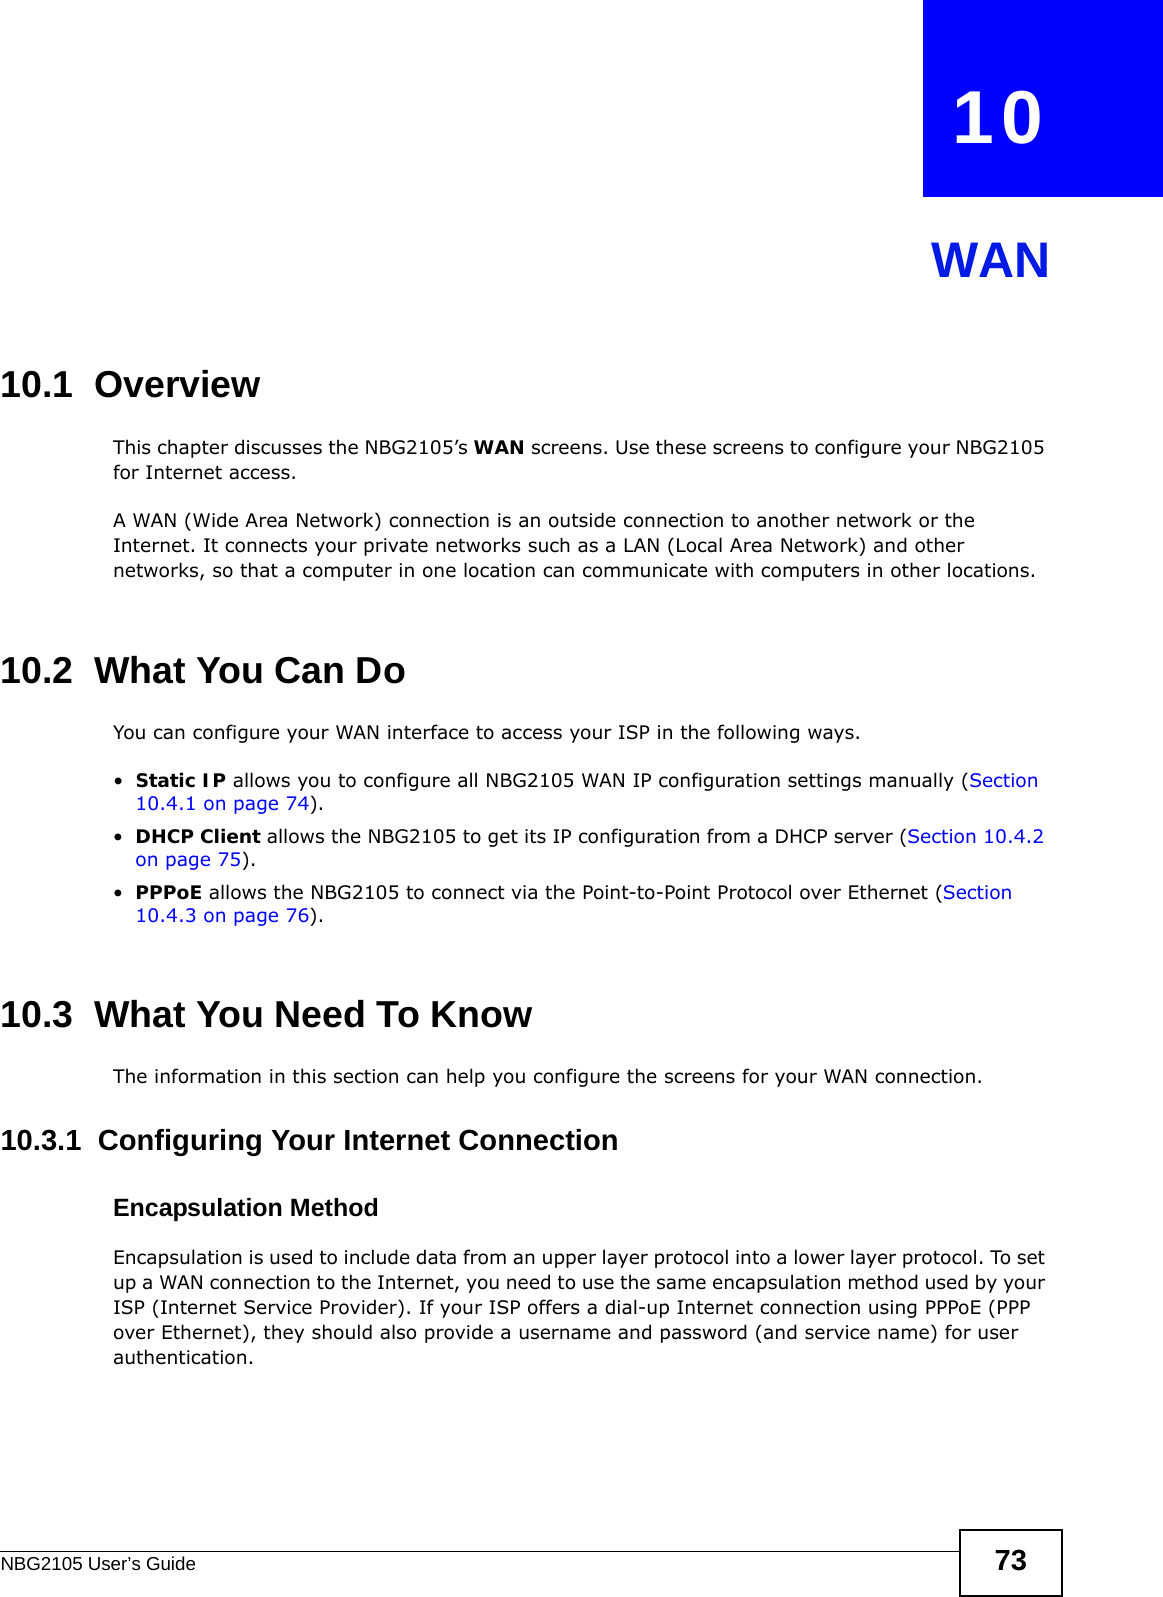 NBG2105 User’s Guide 73CHAPTER   10WAN10.1  OverviewThis chapter discusses the NBG2105’s WAN screens. Use these screens to configure your NBG2105 for Internet access.A WAN (Wide Area Network) connection is an outside connection to another network or the Internet. It connects your private networks such as a LAN (Local Area Network) and other networks, so that a computer in one location can communicate with computers in other locations.10.2  What You Can DoYou can configure your WAN interface to access your ISP in the following ways.•Static IP allows you to configure all NBG2105 WAN IP configuration settings manually (Section 10.4.1 on page 74).•DHCP Client allows the NBG2105 to get its IP configuration from a DHCP server (Section 10.4.2 on page 75).•PPPoE allows the NBG2105 to connect via the Point-to-Point Protocol over Ethernet (Section 10.4.3 on page 76).10.3  What You Need To KnowThe information in this section can help you configure the screens for your WAN connection.10.3.1  Configuring Your Internet ConnectionEncapsulation MethodEncapsulation is used to include data from an upper layer protocol into a lower layer protocol. To set up a WAN connection to the Internet, you need to use the same encapsulation method used by your ISP (Internet Service Provider). If your ISP offers a dial-up Internet connection using PPPoE (PPP over Ethernet), they should also provide a username and password (and service name) for user authentication.